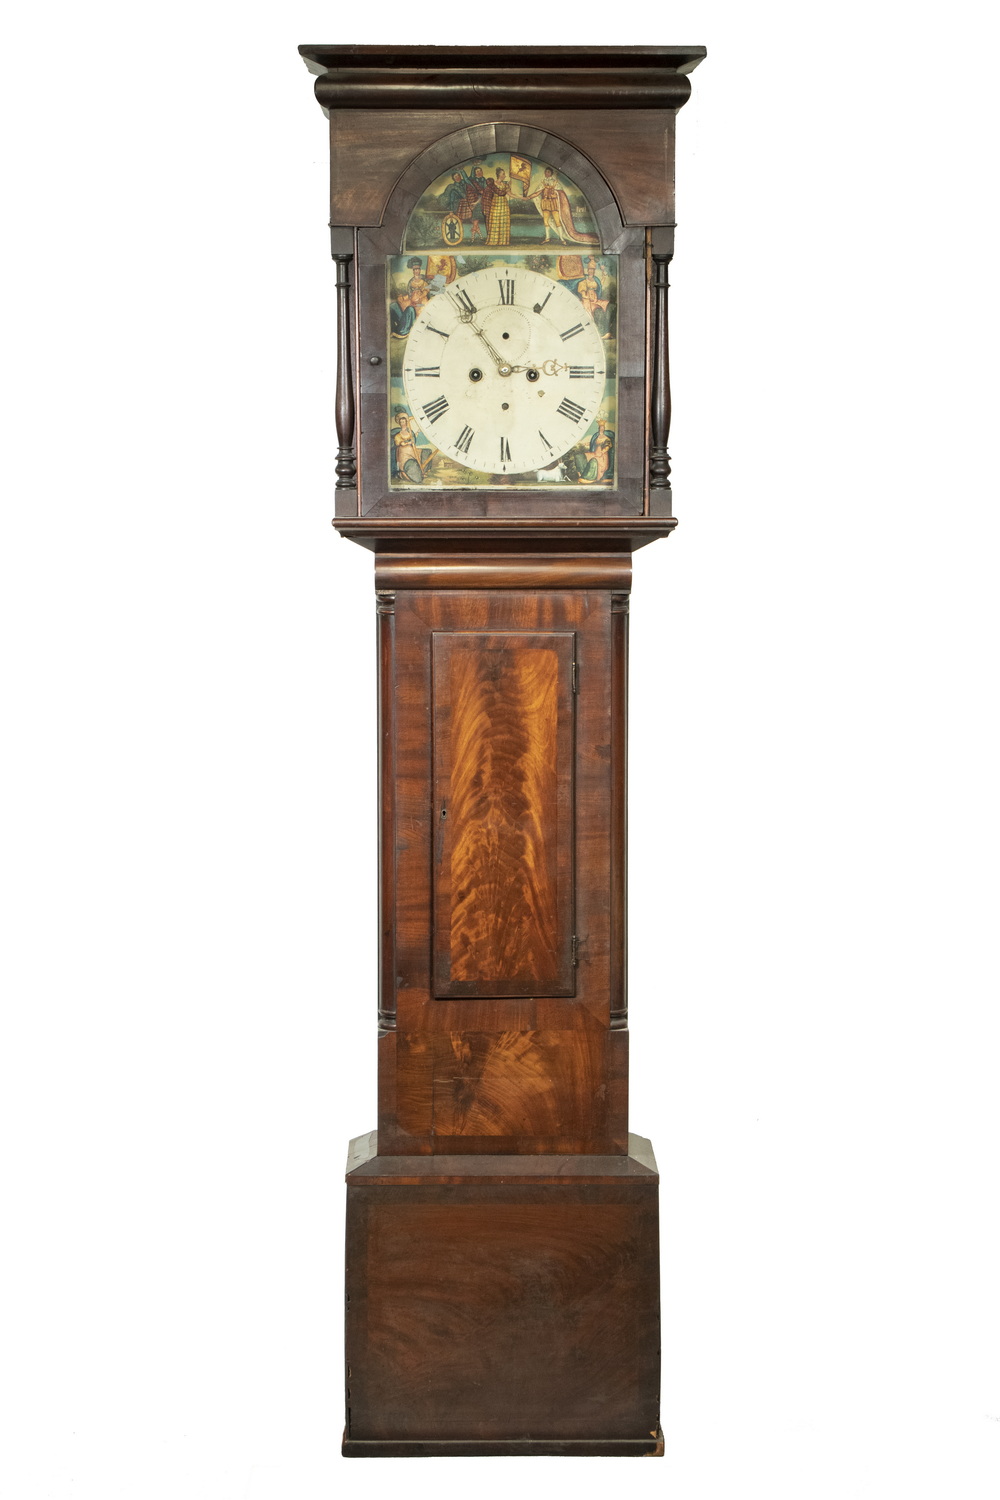 TALL CLOCK COMMEMORATING THE UNION OF